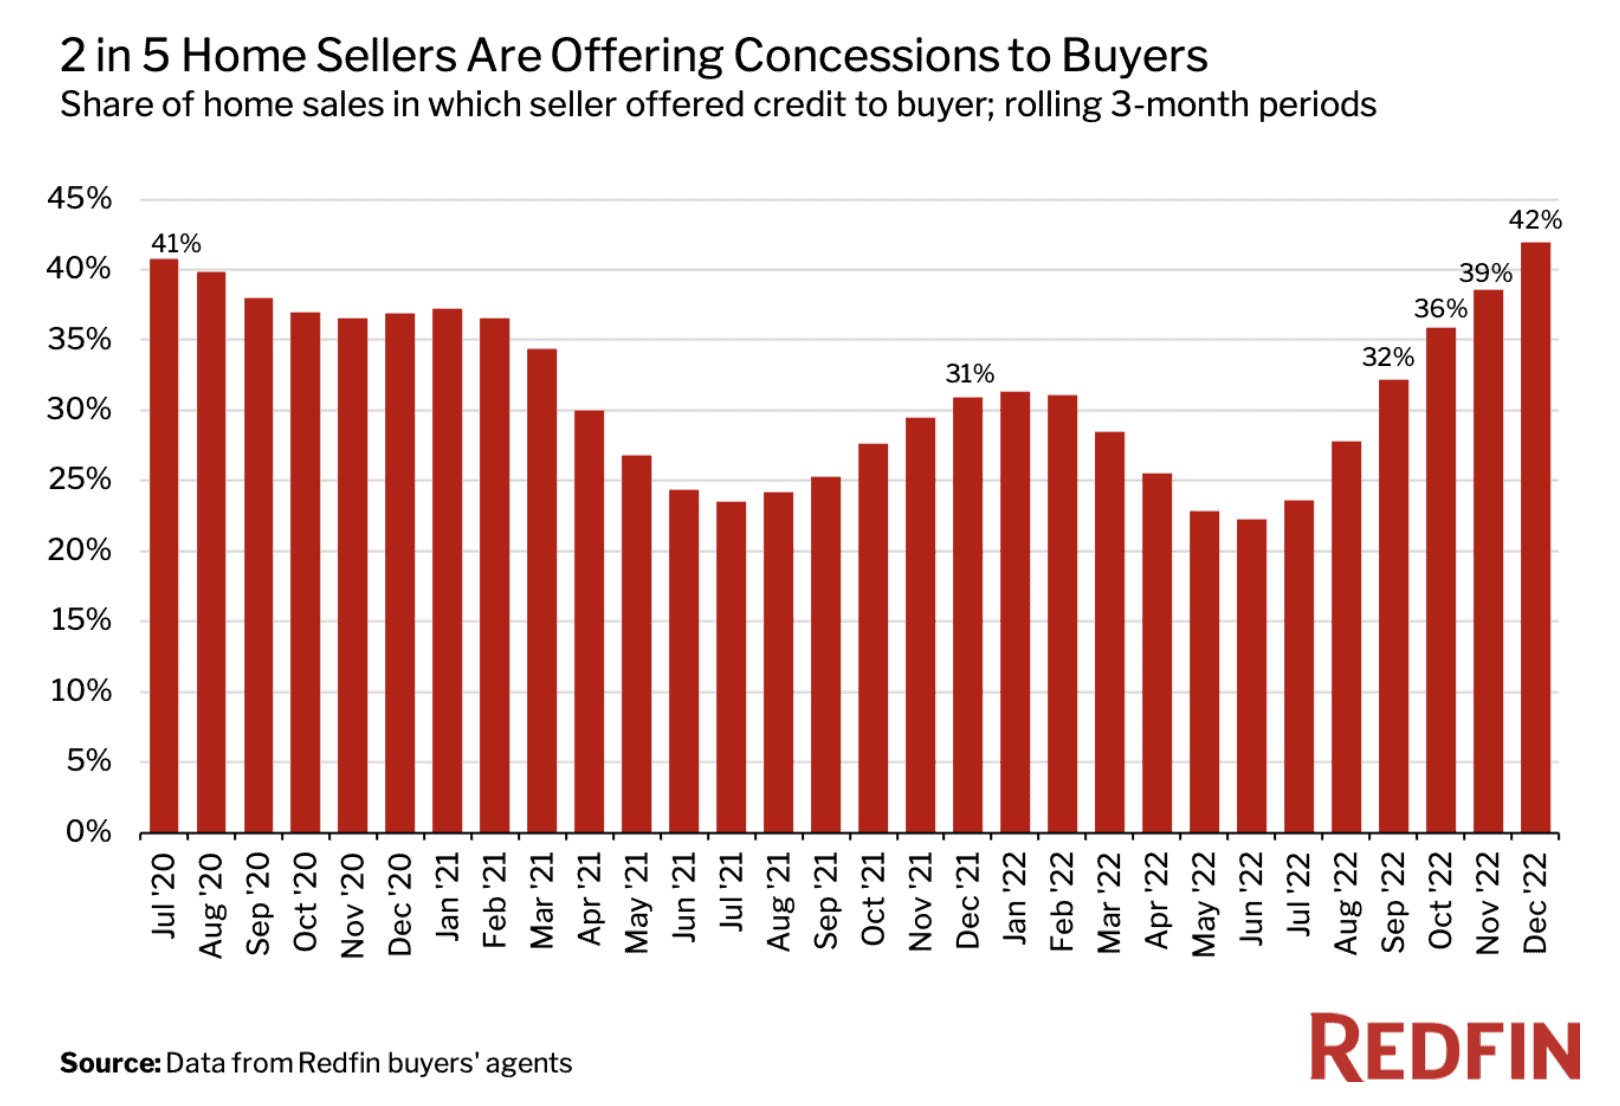 Should I buy a house now? According to this chart of seller concessions in the real estate market from July 2020 to December 2022, the answer is leaning towards "Yes."